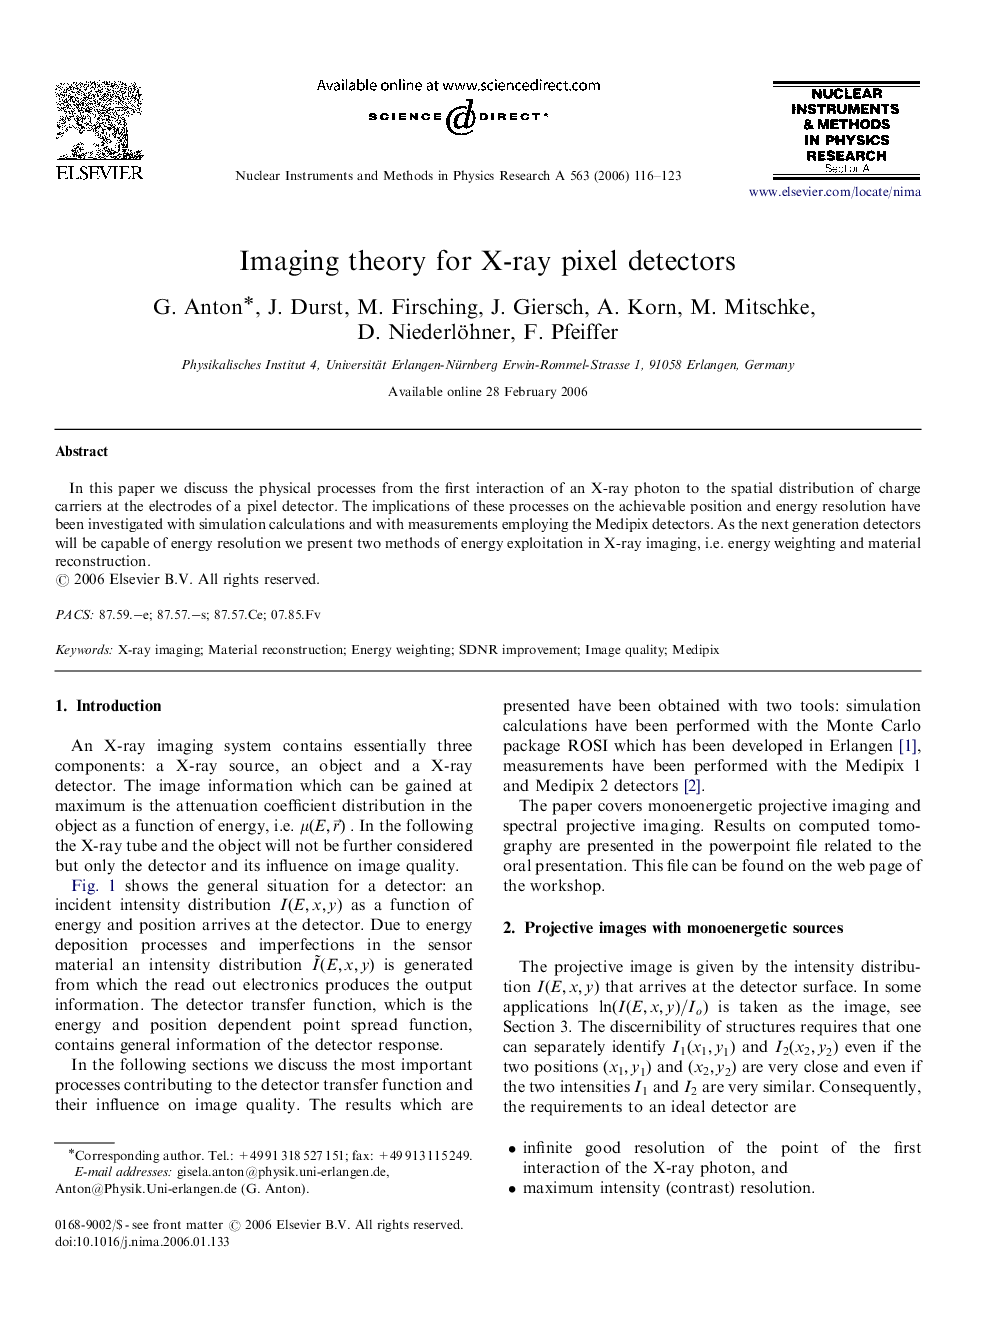 Imaging theory for X-ray pixel detectors